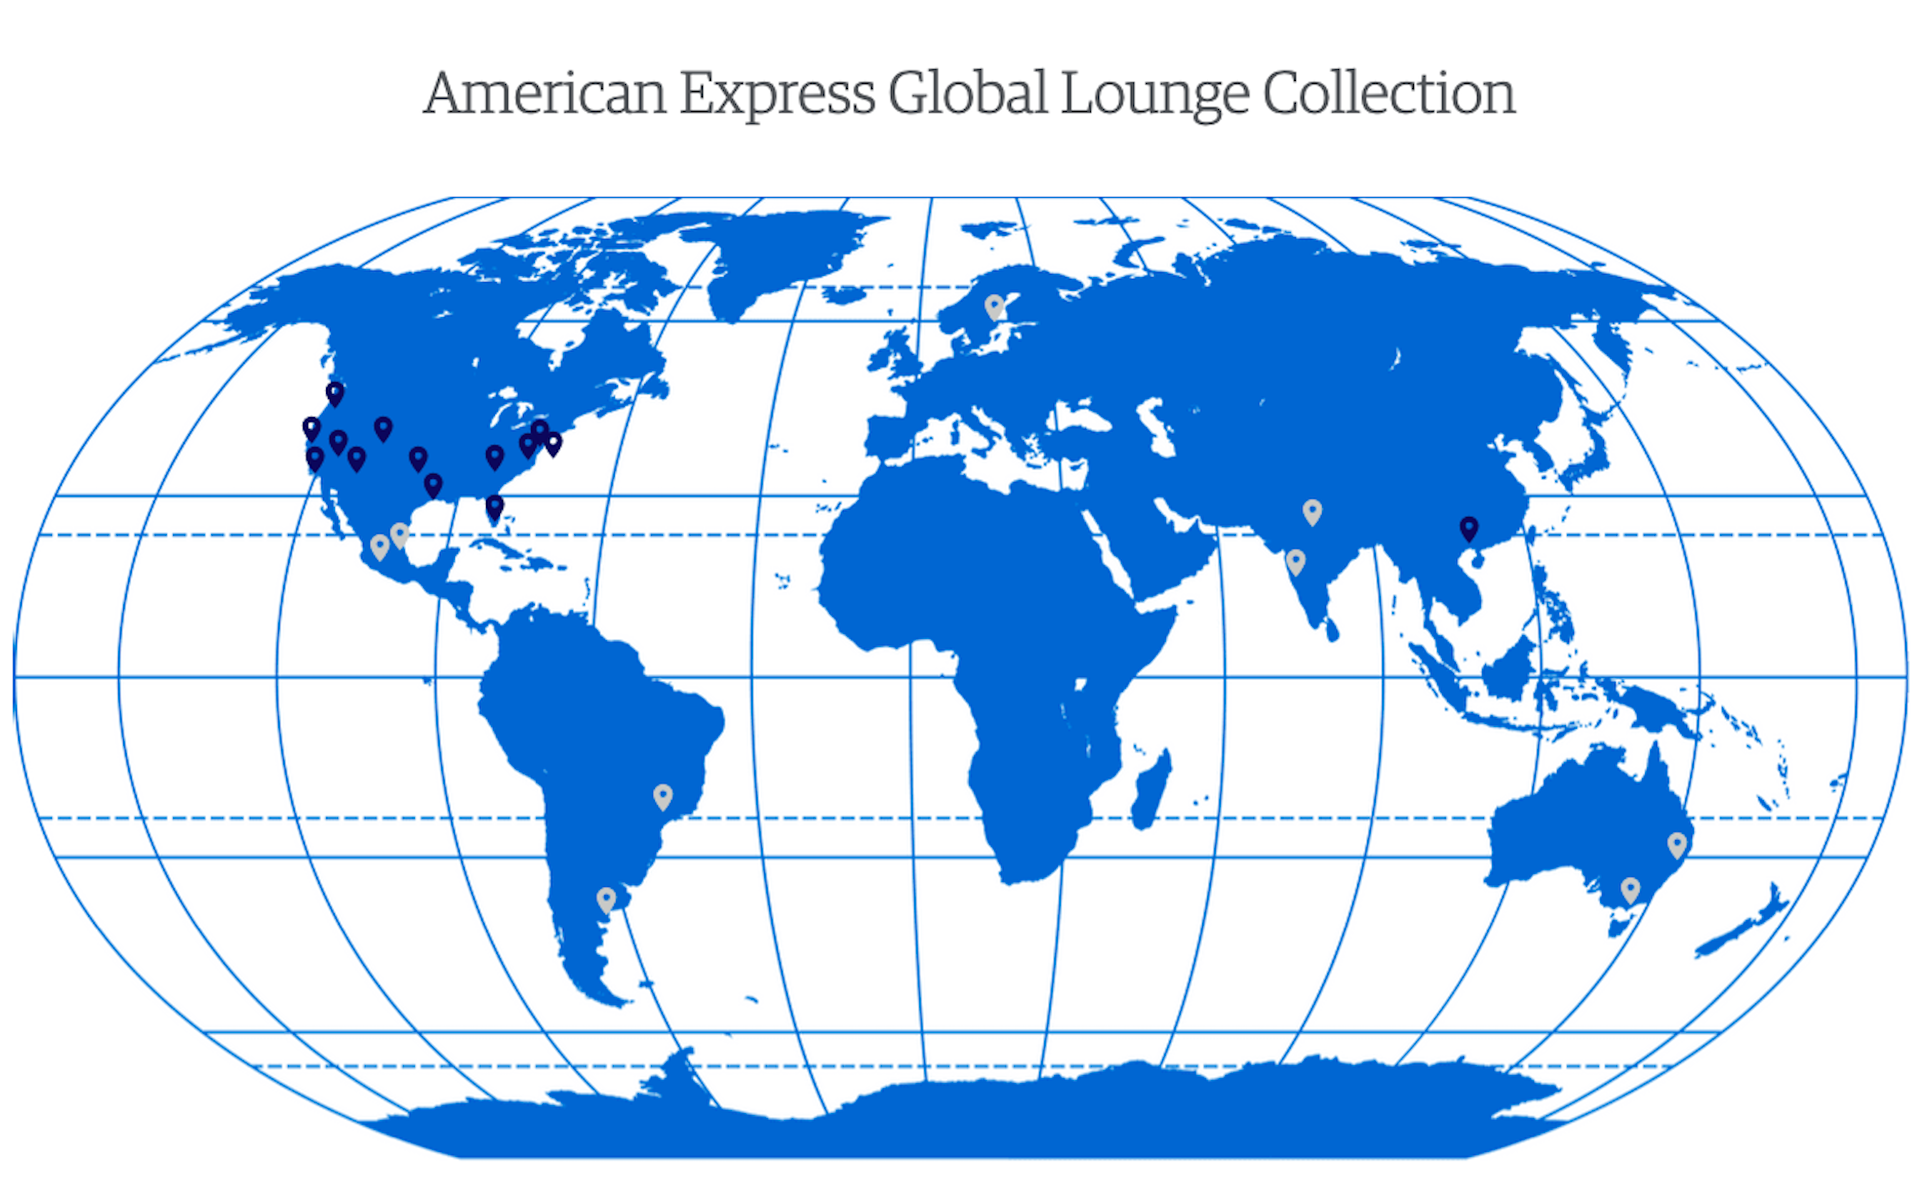 Amex Centurion Lounge Locations - Where They Are & How To Find Them